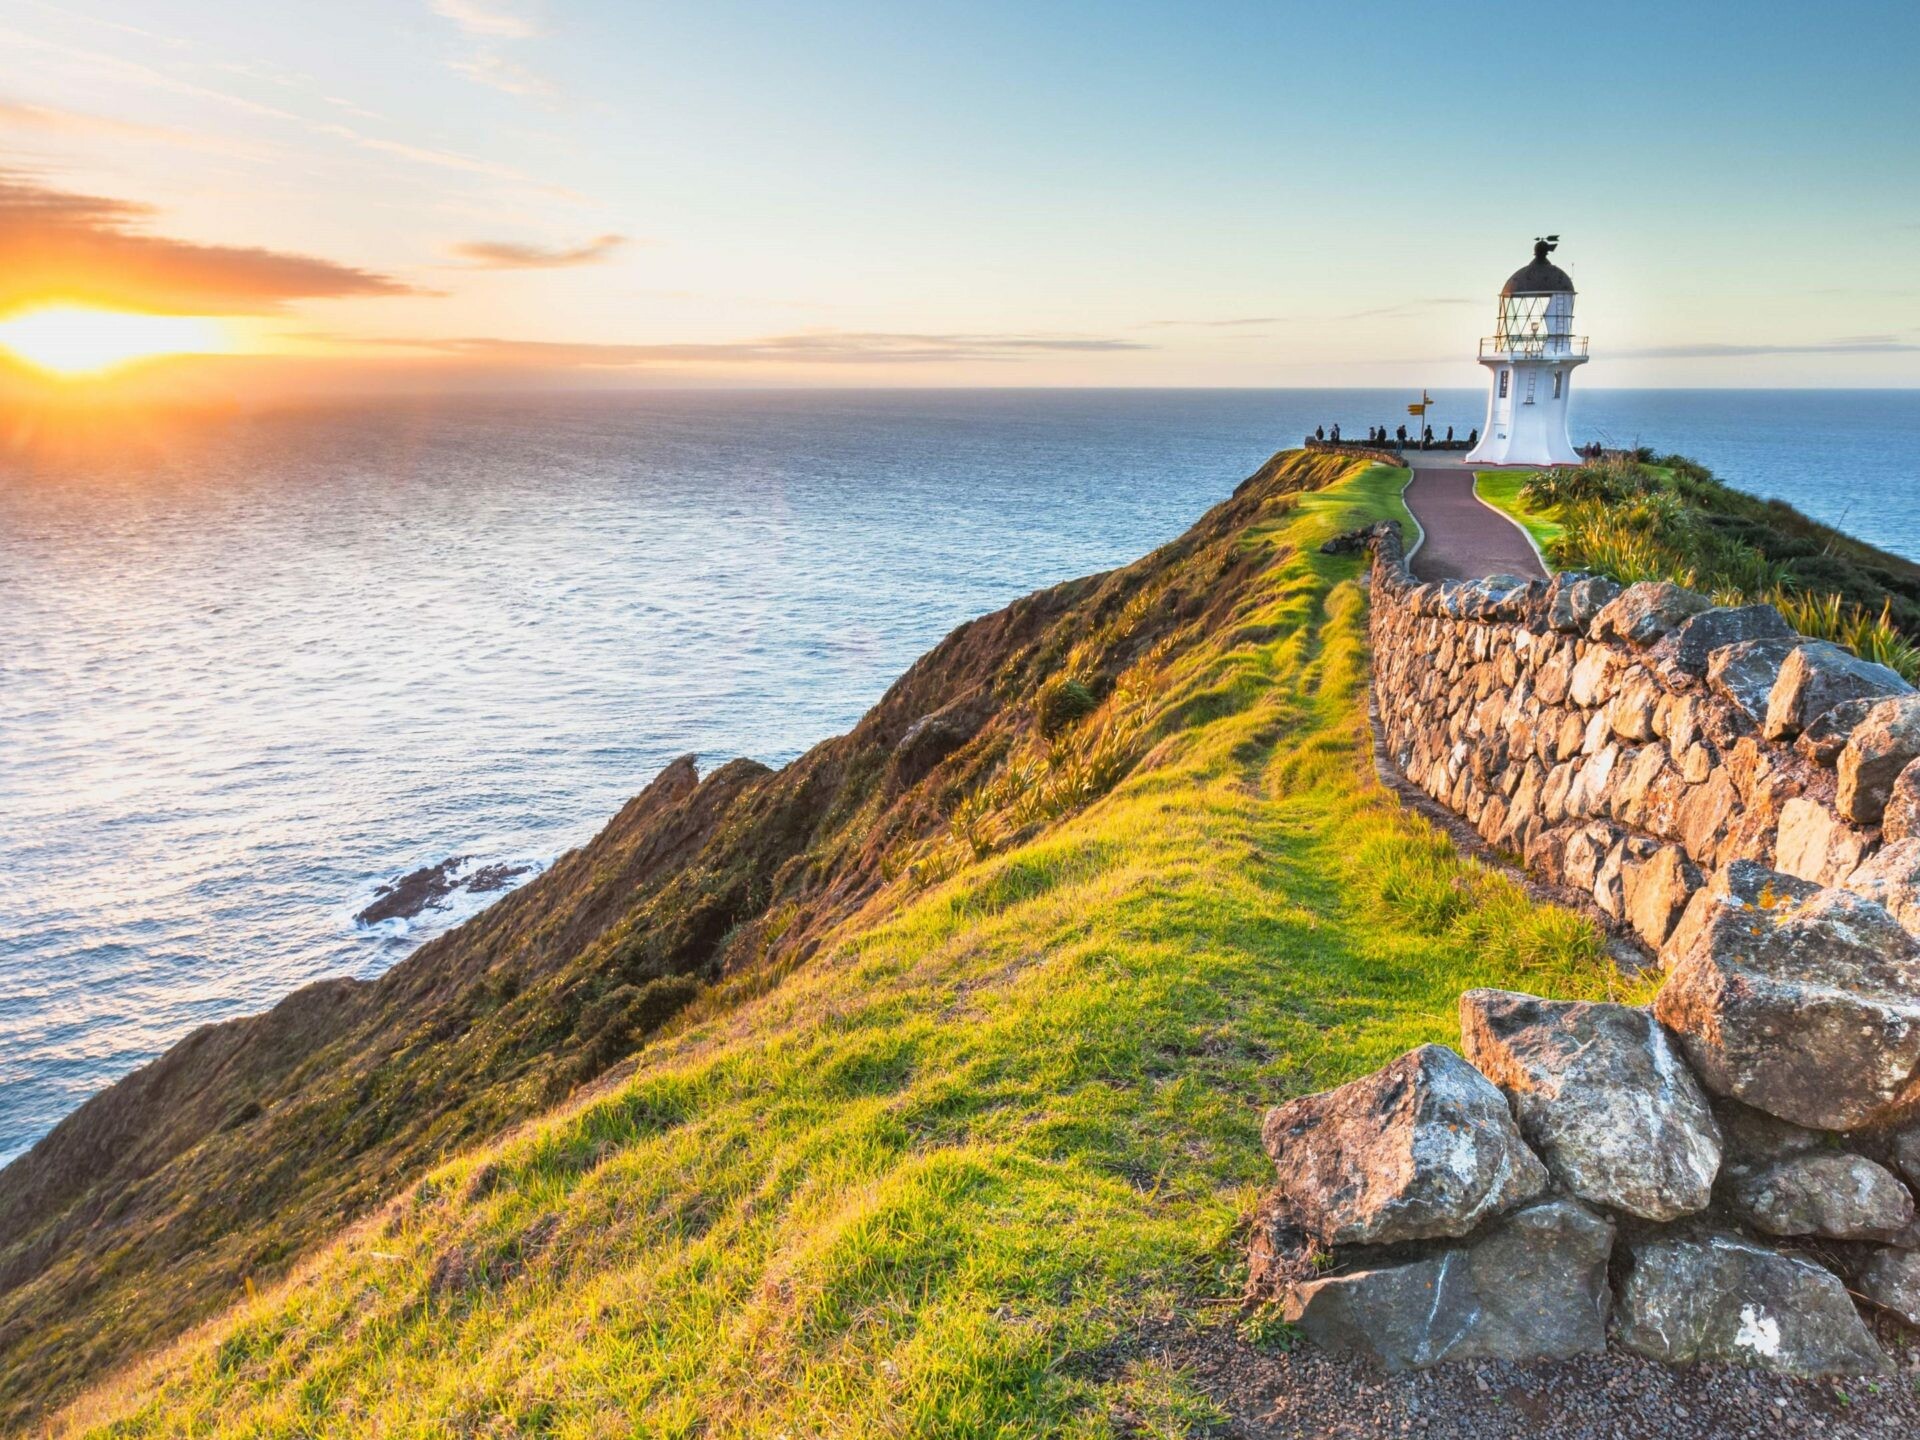 New Zealand: Cape Reinga Lighthouse, The Northland Region of the North Island. 1920x1440 HD Wallpaper.